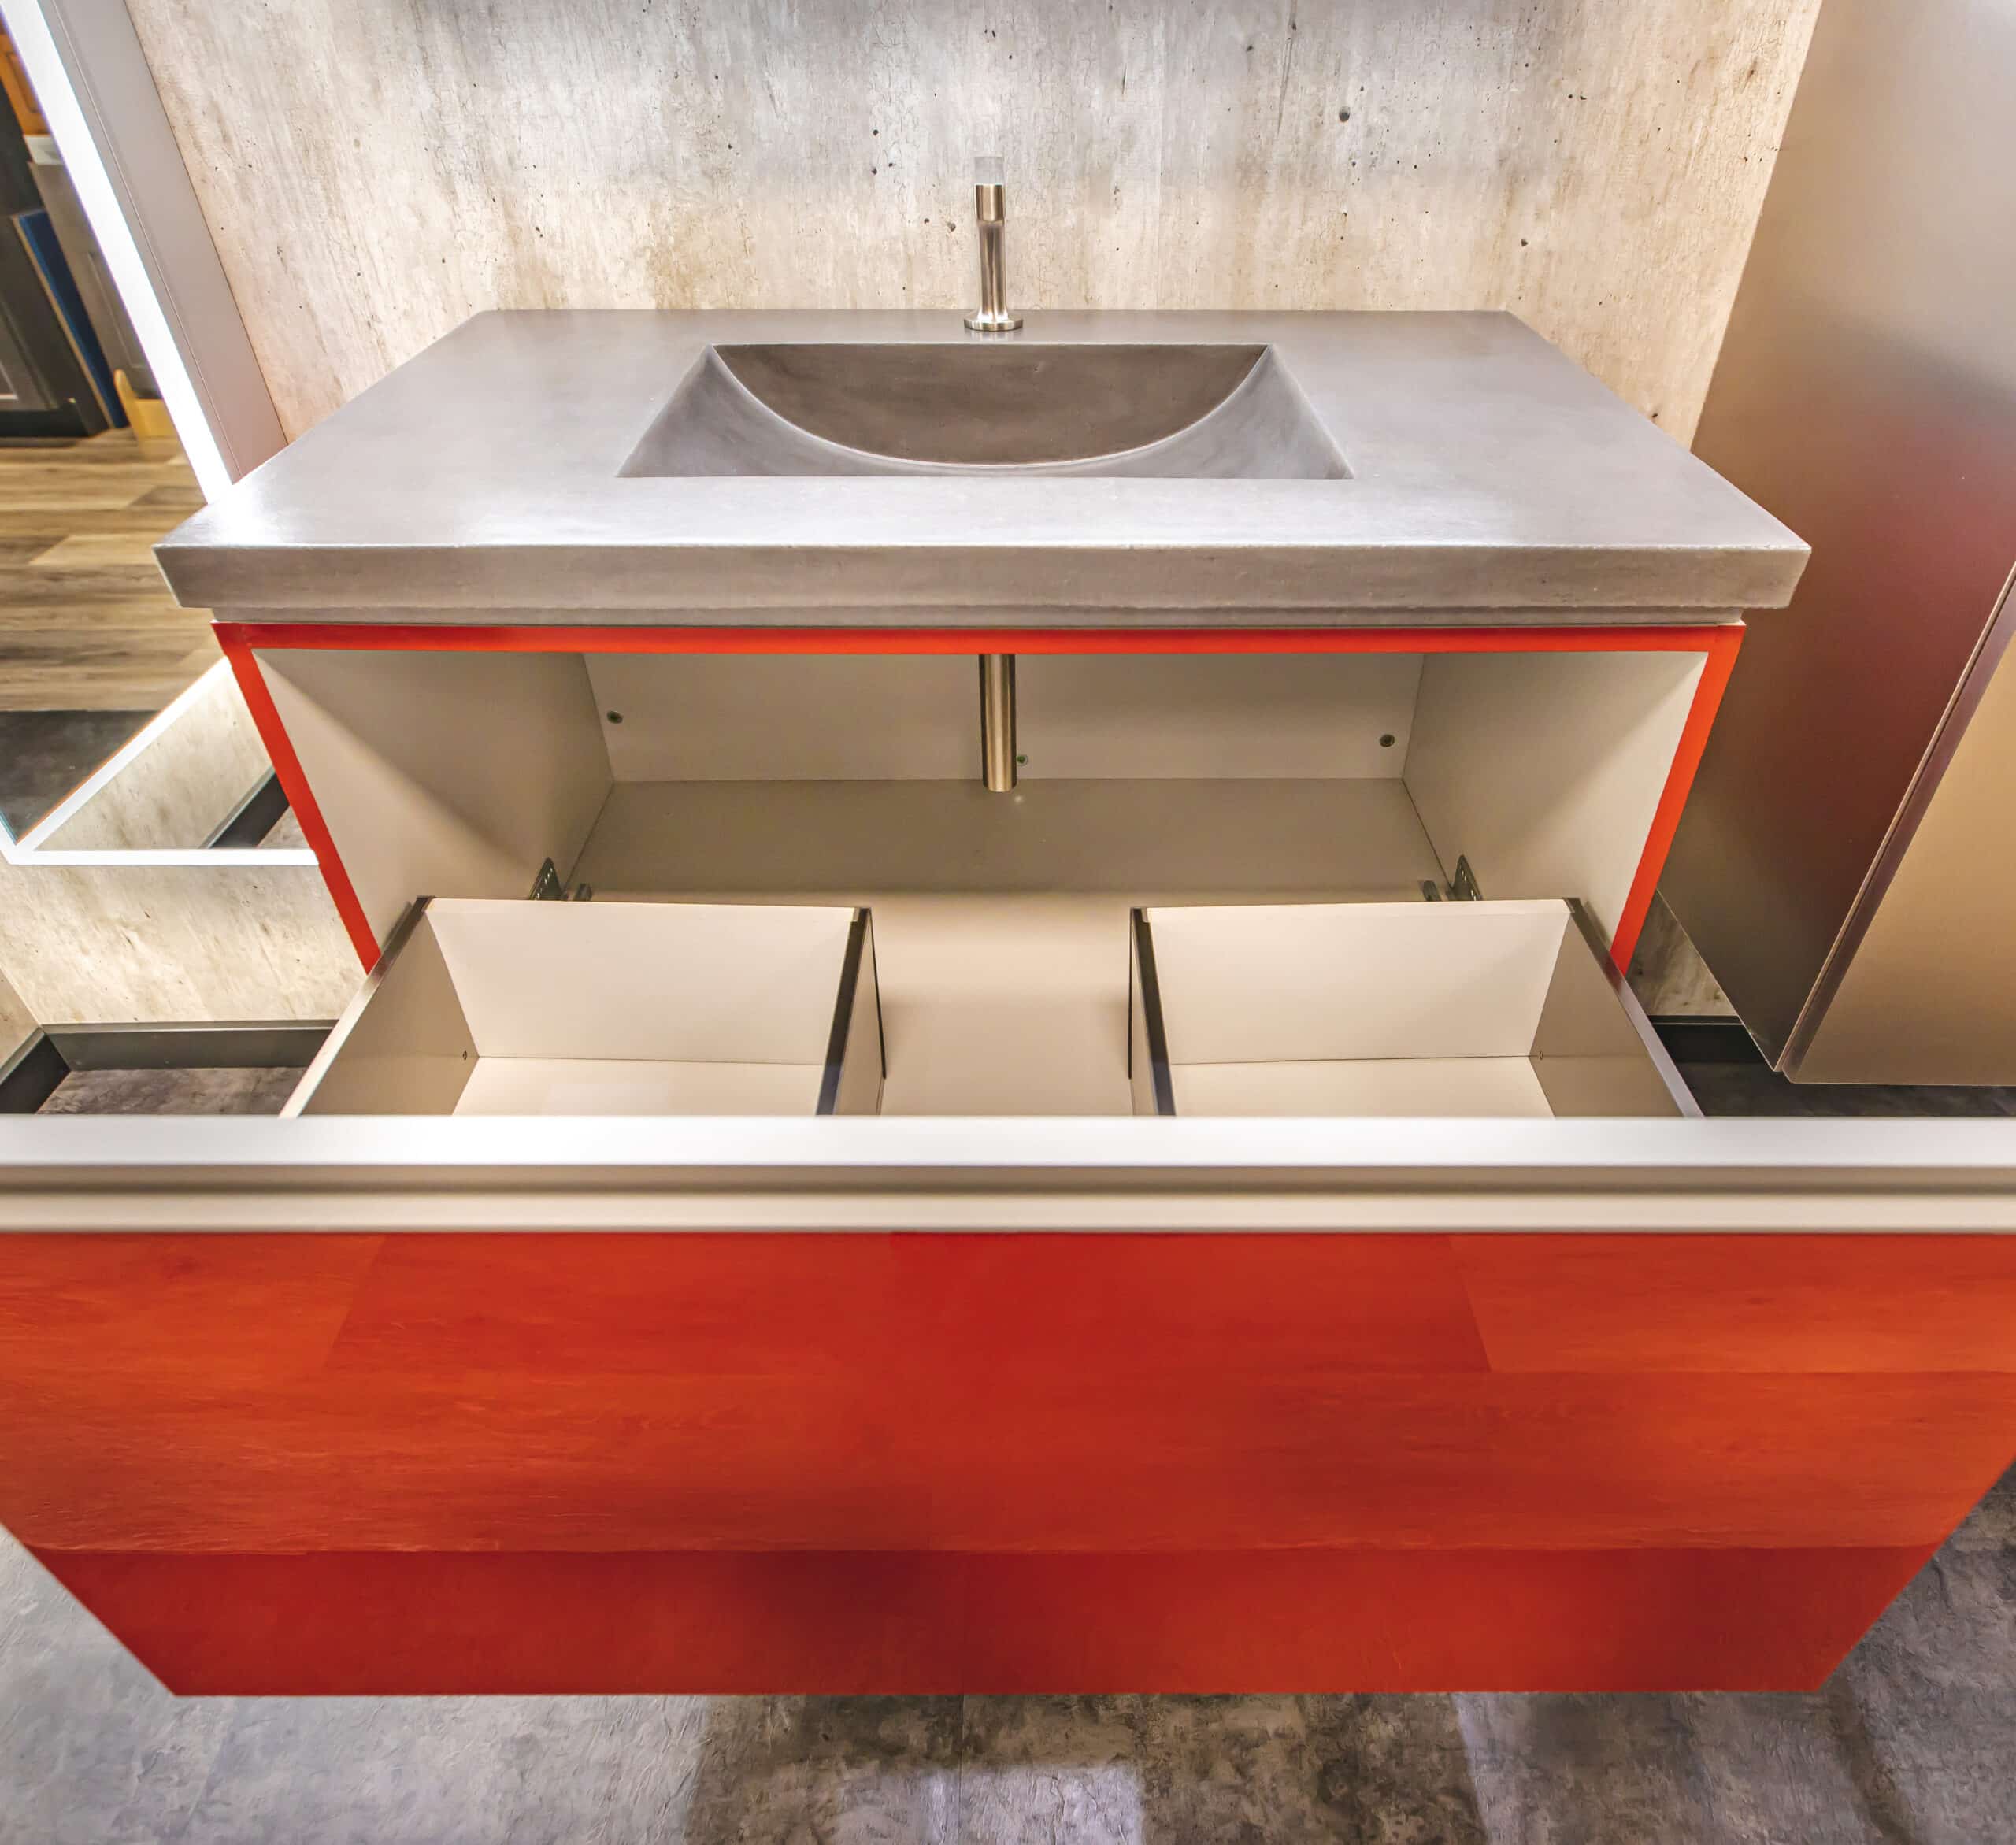 A sink with a drawer underneath it